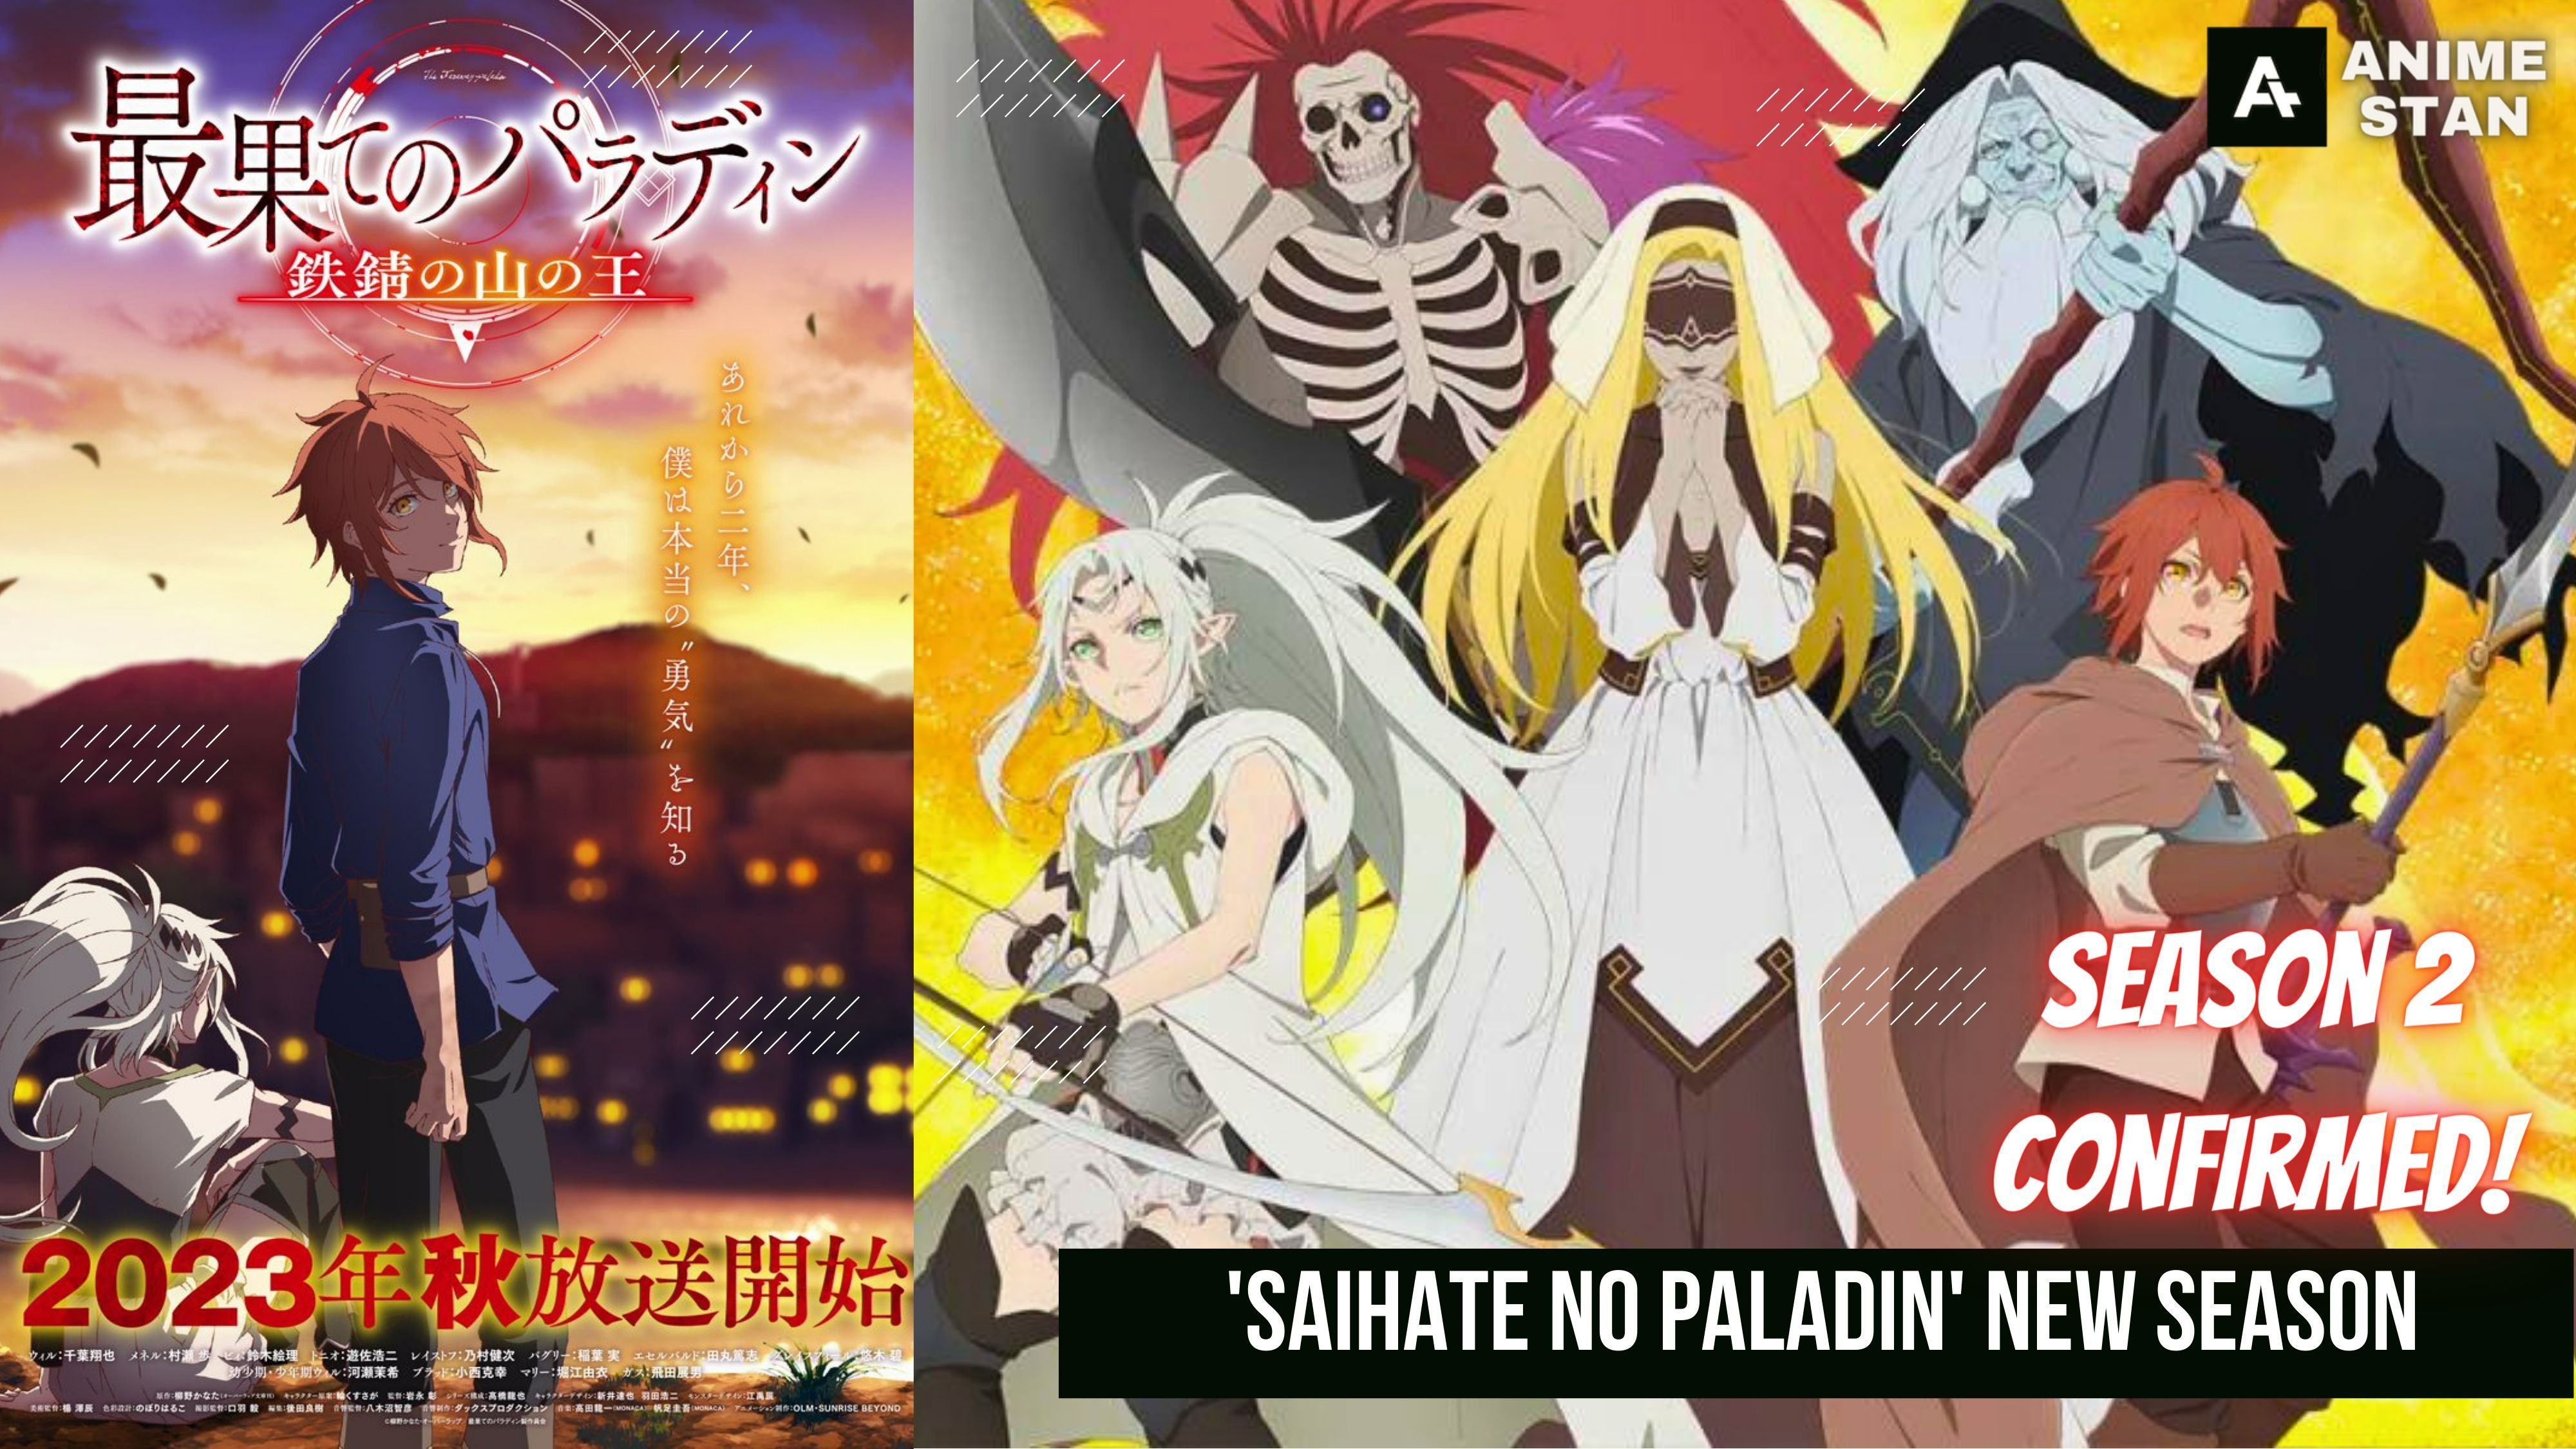 The Faraway Paladin Season 2 release date in Fall 2023 confirmed